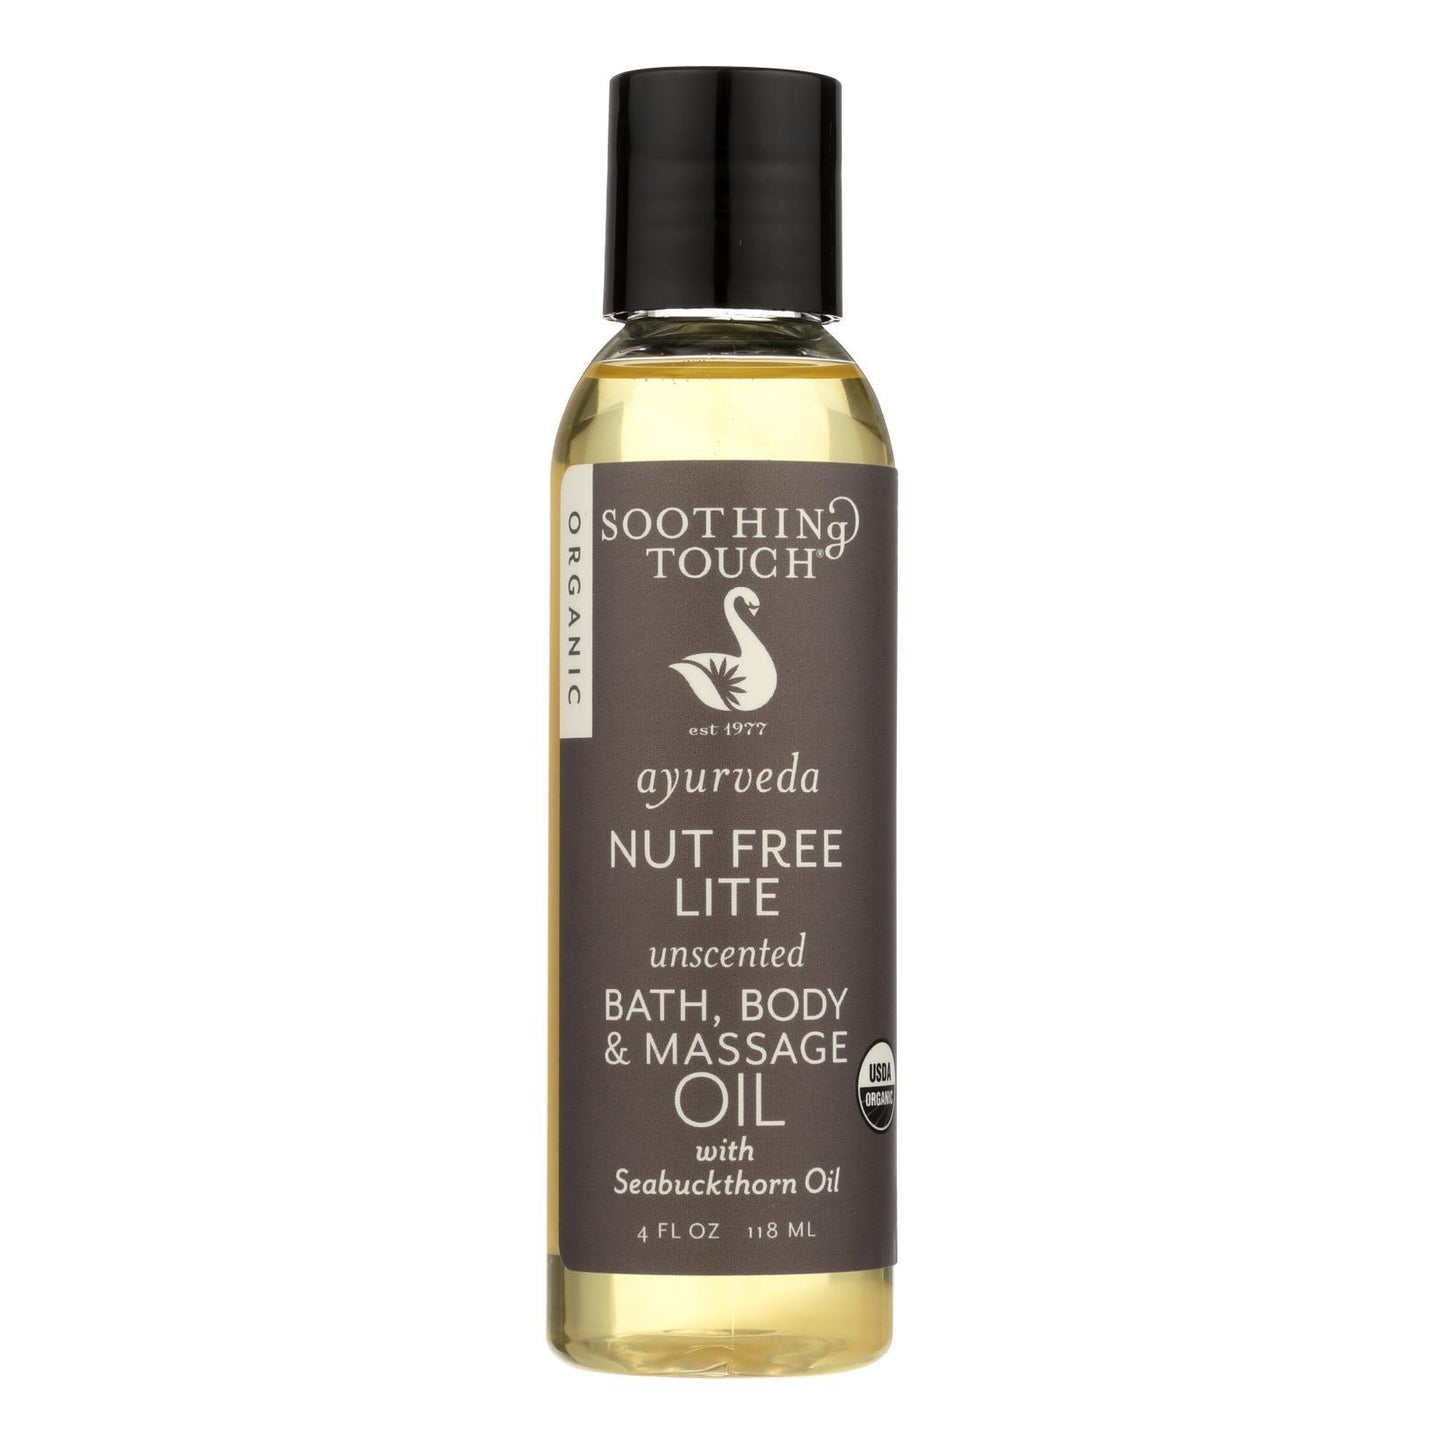 Soothing Touch Bath Body And Massage Oil - Organic - Ayurveda - Nut Free Lite - Unscented - 4 Oz